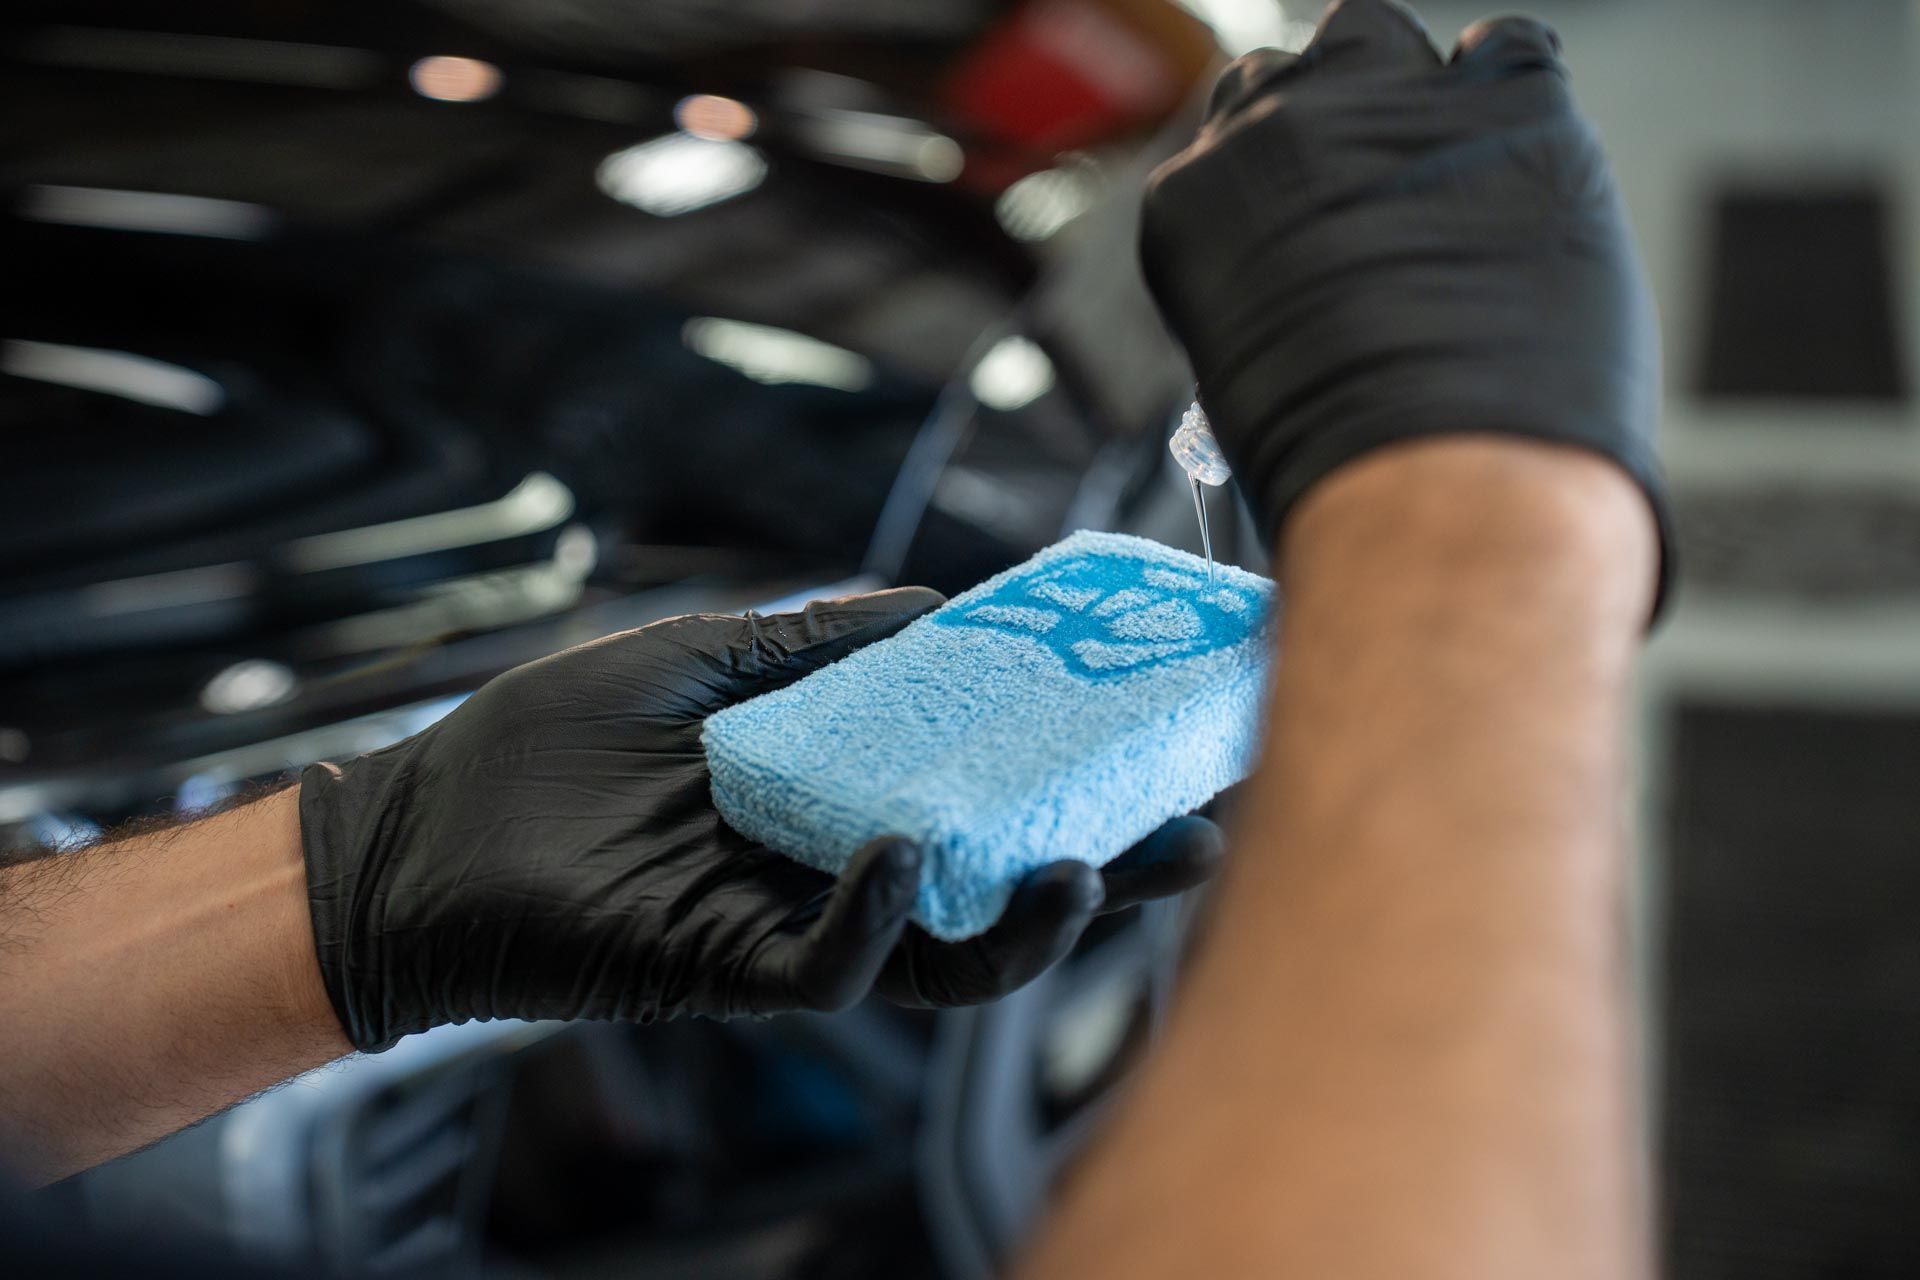 Ceramic Coating - A person wearing black gloves is holding a blue sponge with a logo on it